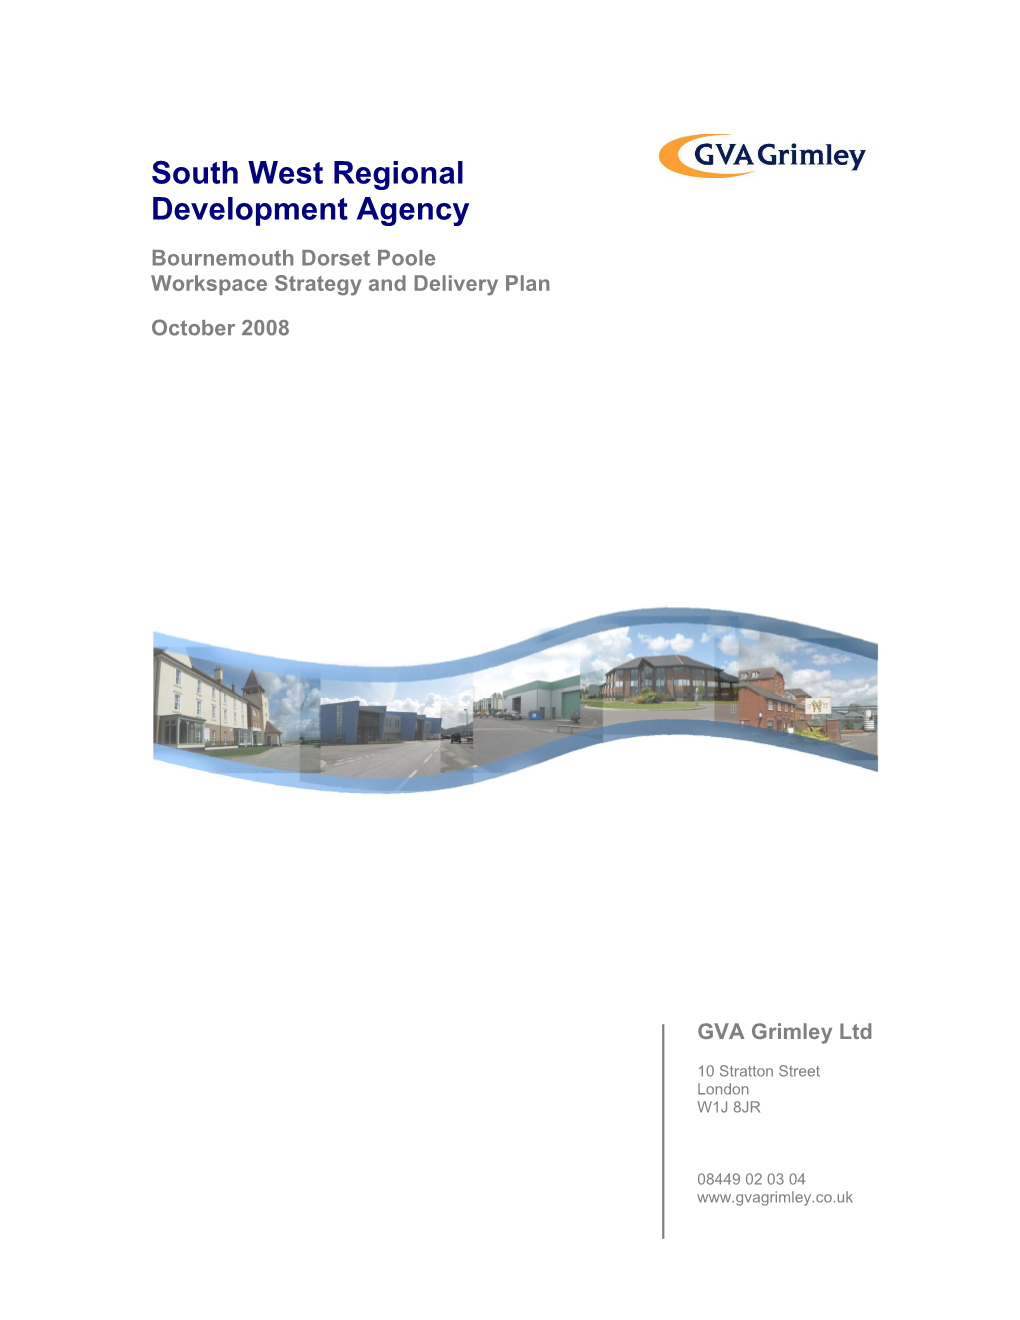 Bournemouth Dorset Poole Workspace Strategy and Delivery Plan